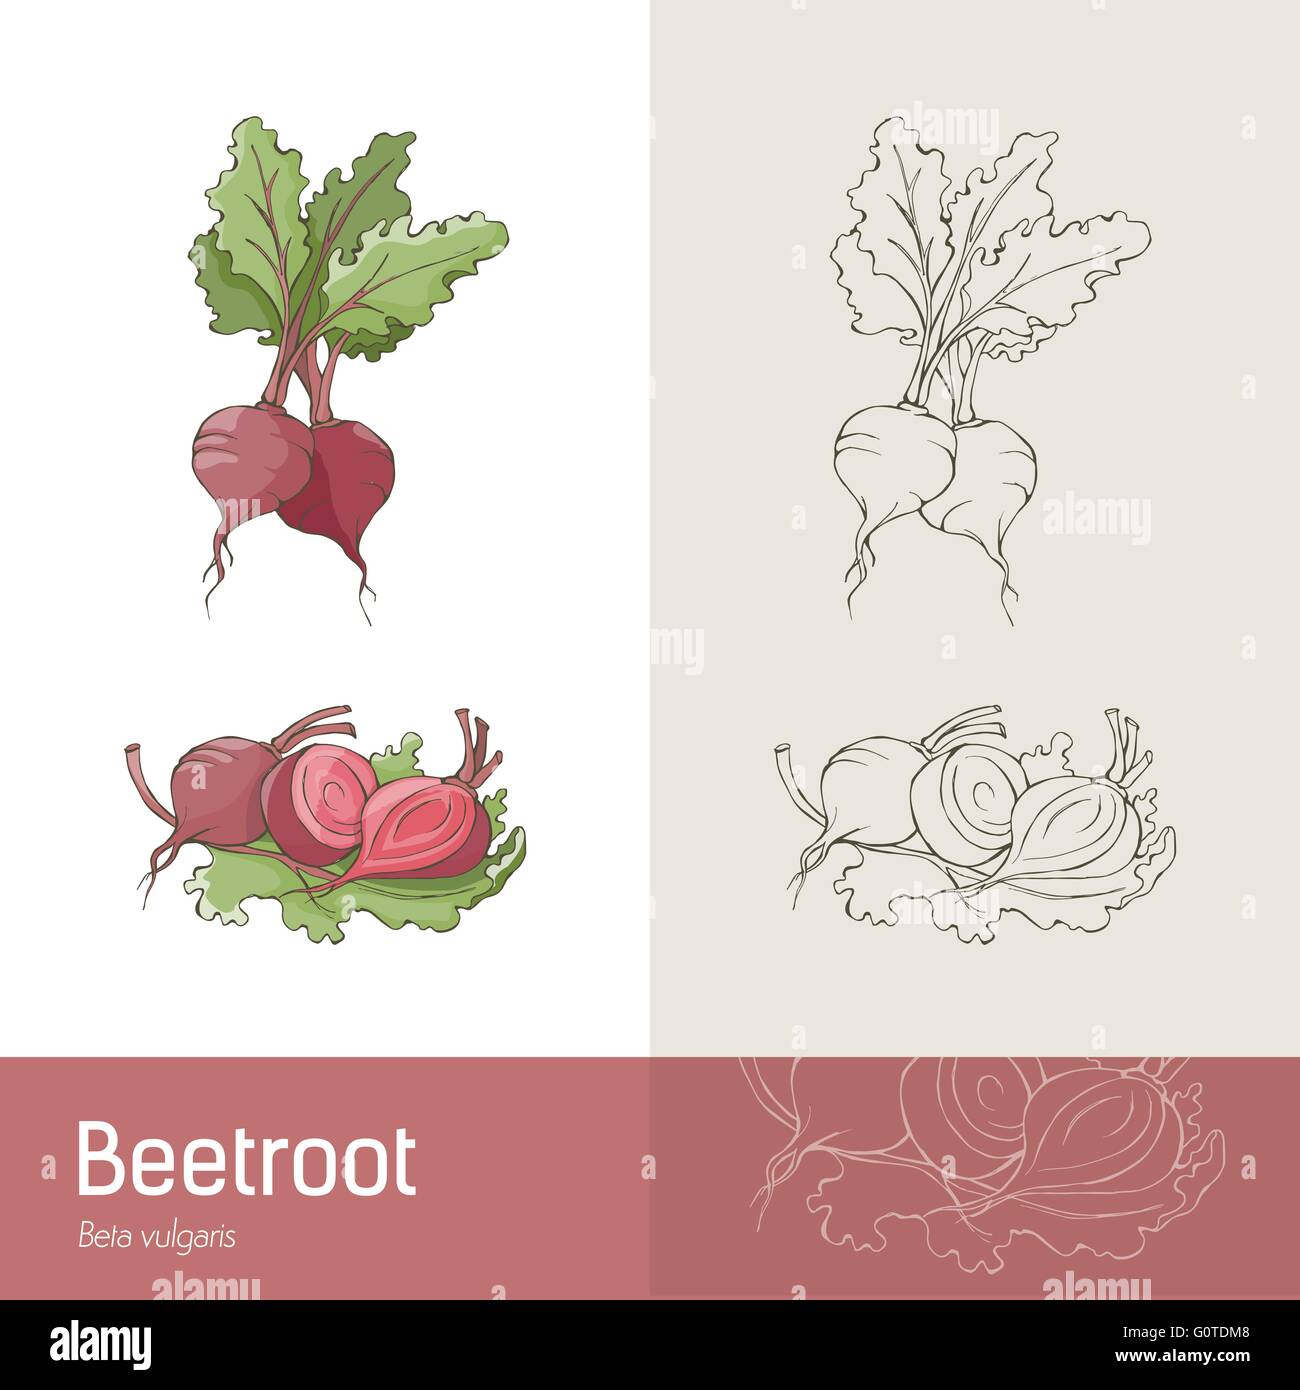 Hand drawn botanical sketch of beetroots, roots and leaves Stock Vector